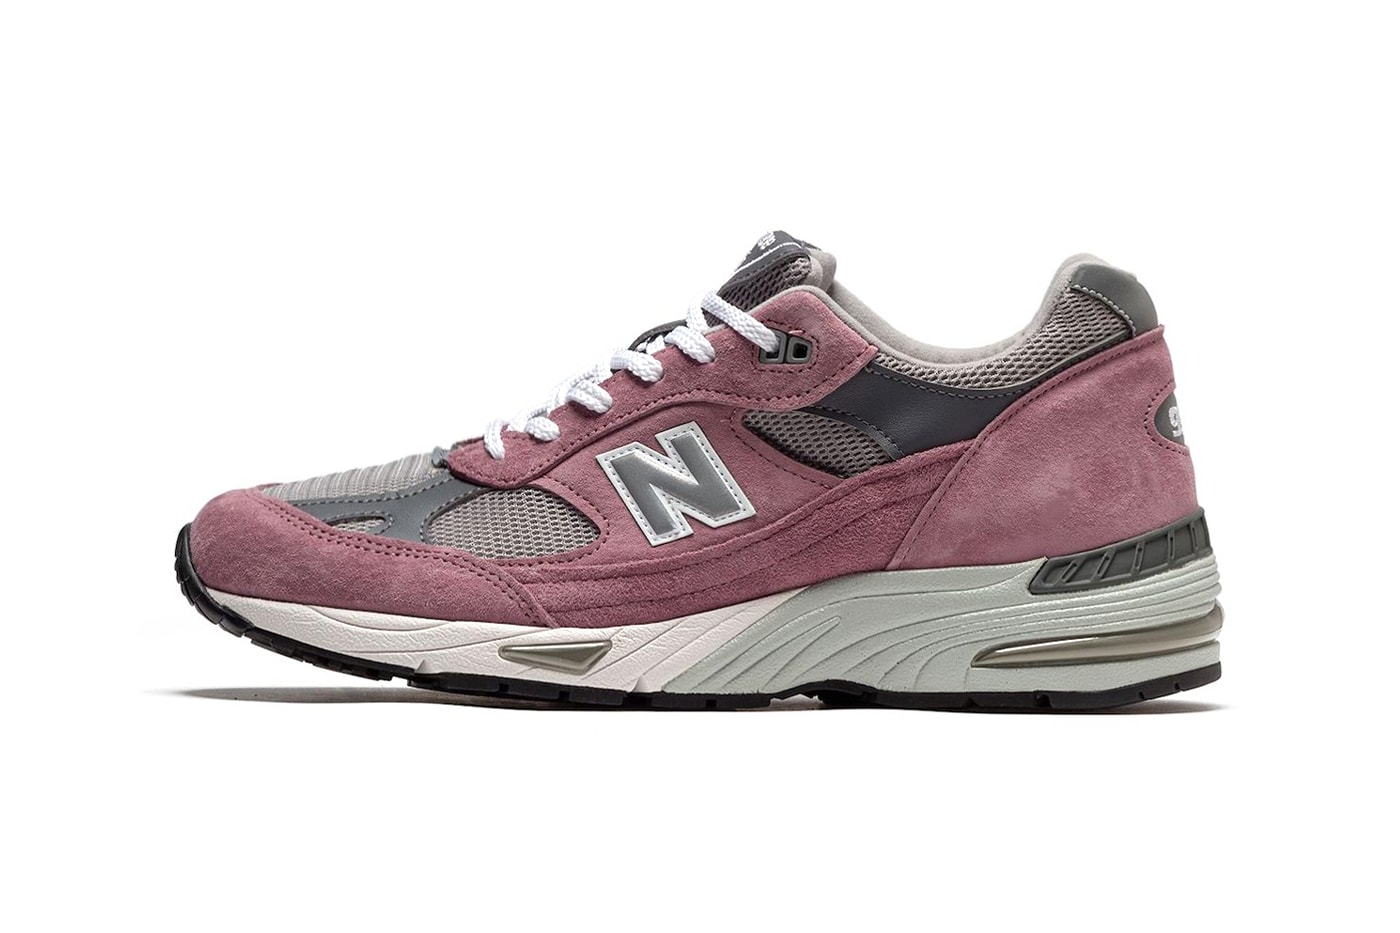 New Balance 991 Arrives in "Pink Suede" Made in UK M991PGG dad shoes sneakers pink pig skin suede darker shade grey